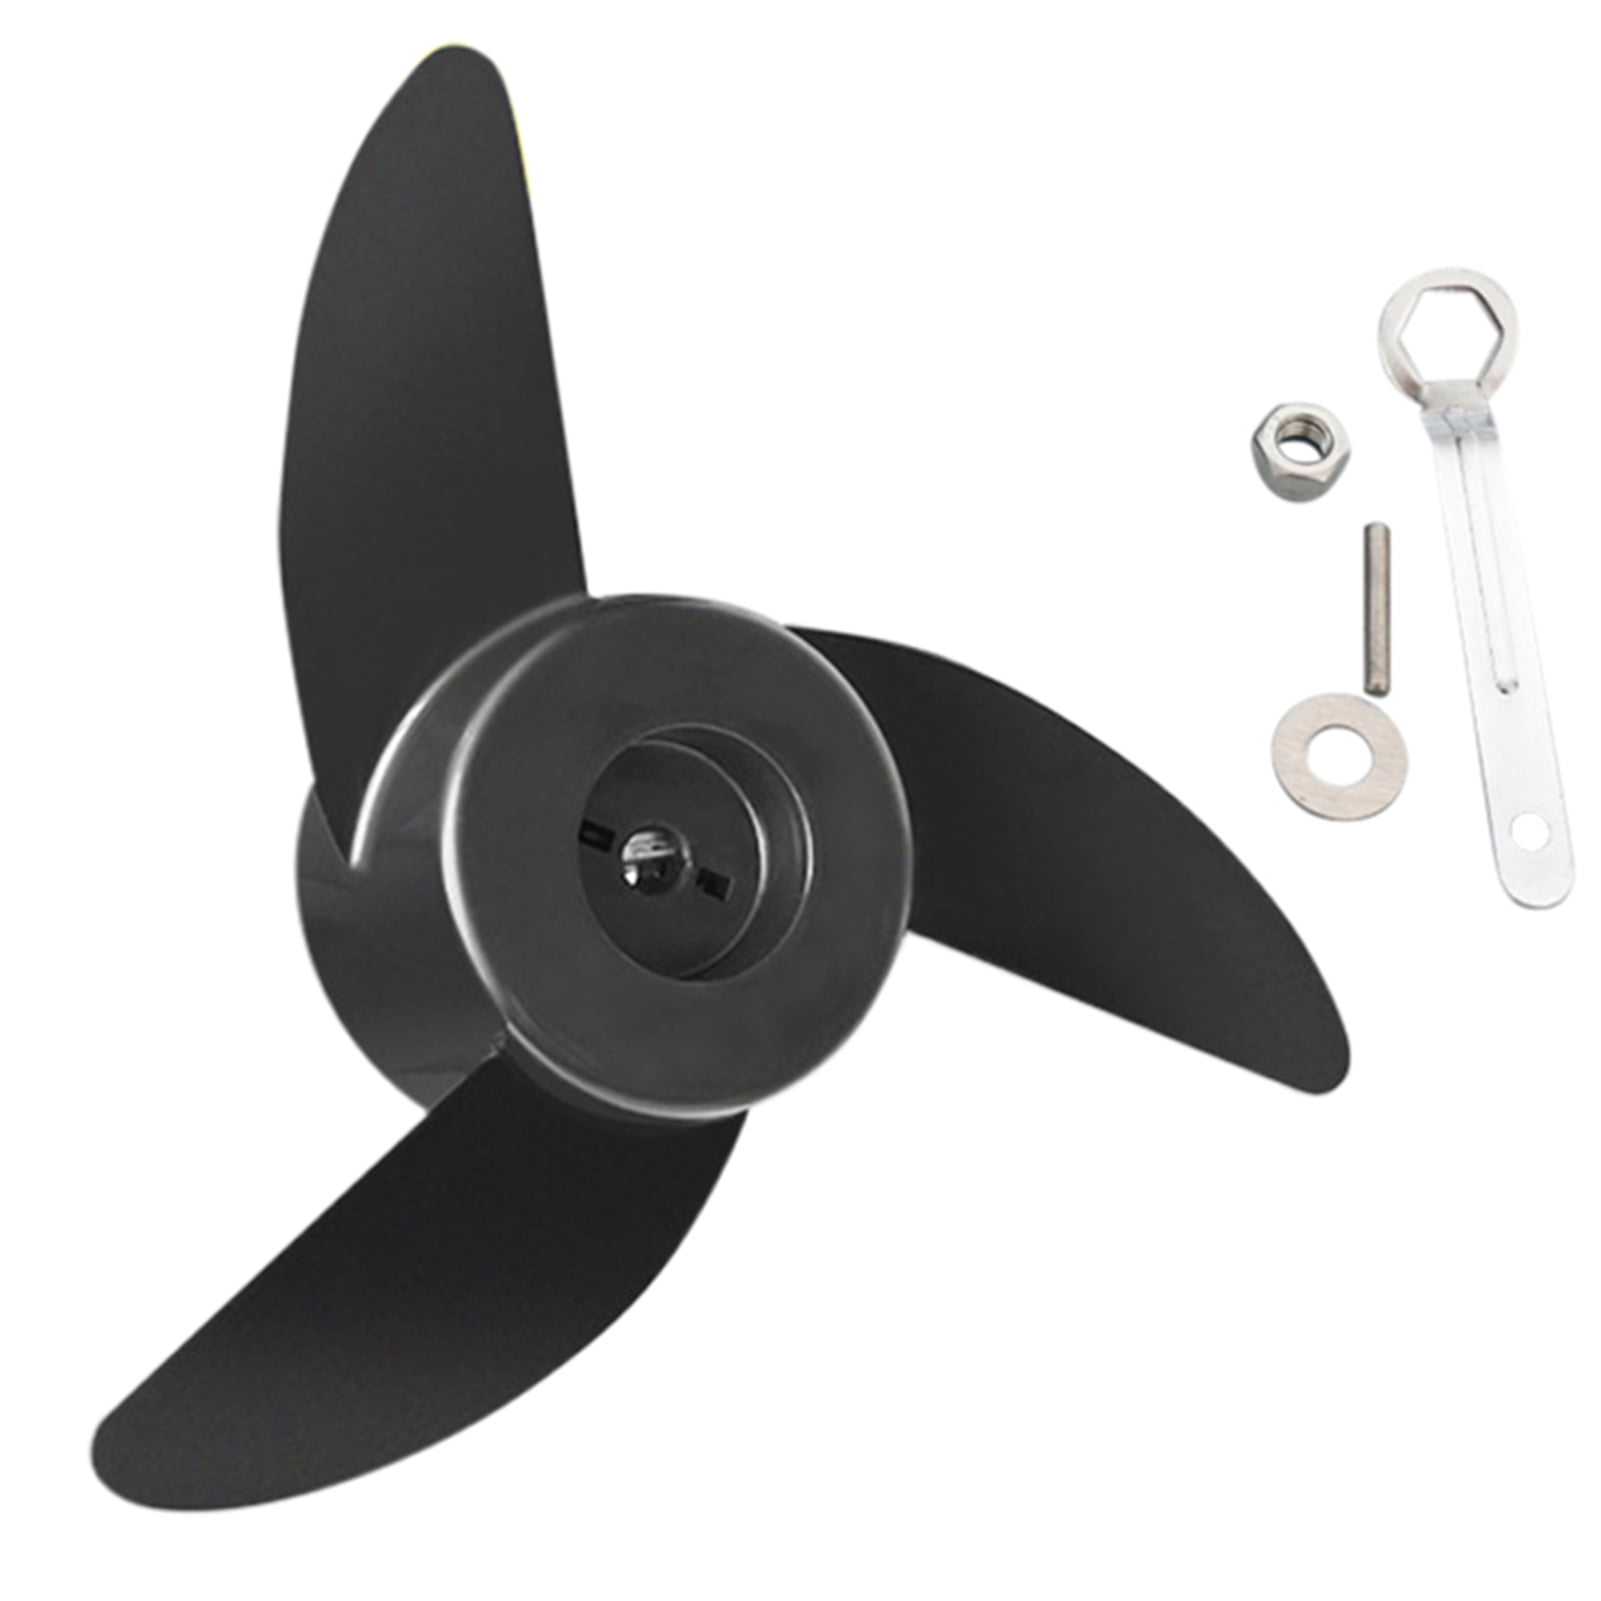 Two Blades Replacement Trolling Motor Prop Propeller for Trolling Motors 